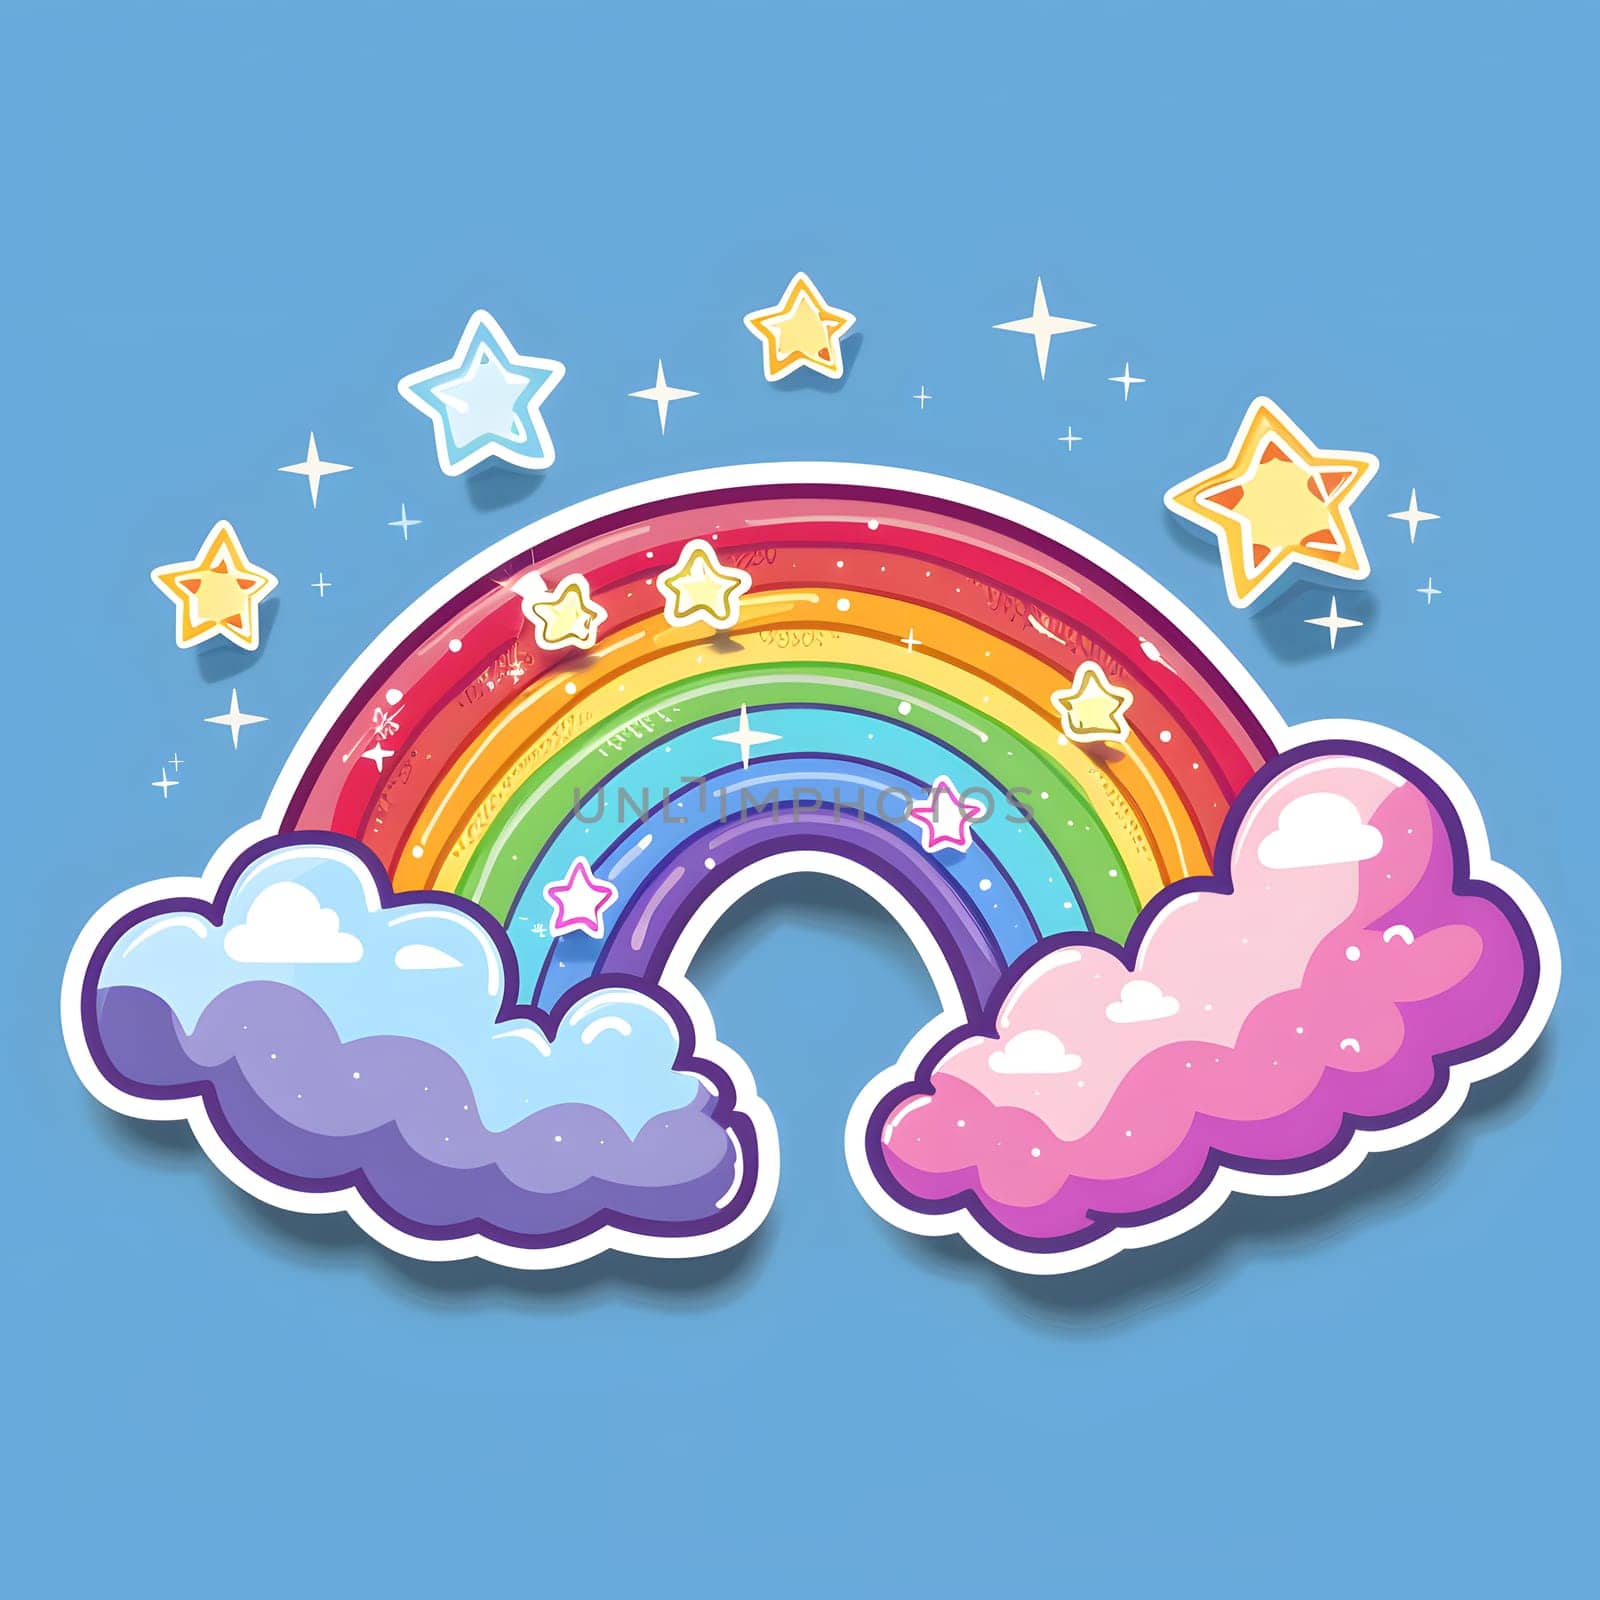 Rainbow surrounded by stars and clouds on azure sky background by Nadtochiy